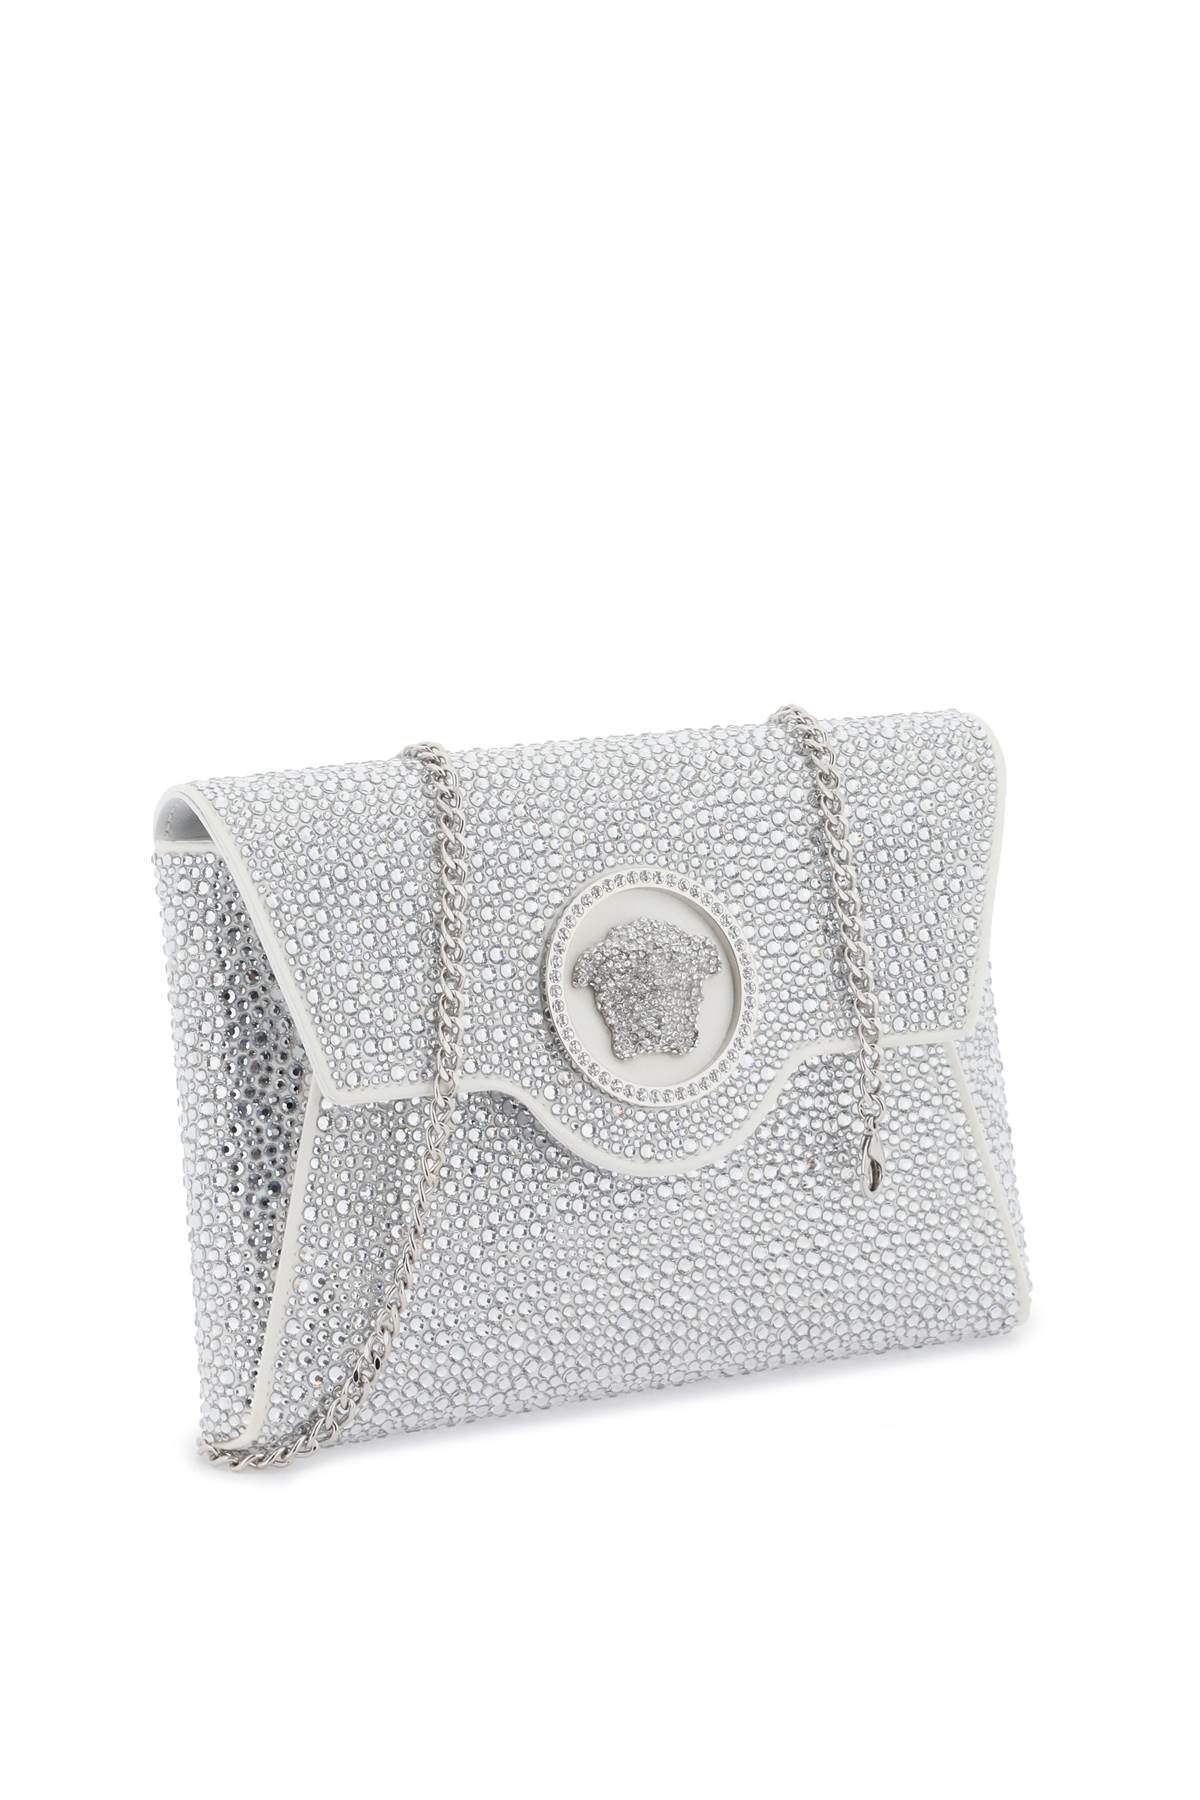 VERSACE Sparkling Silver Satin Envelope Clutch with Iconic Medusa - SS24